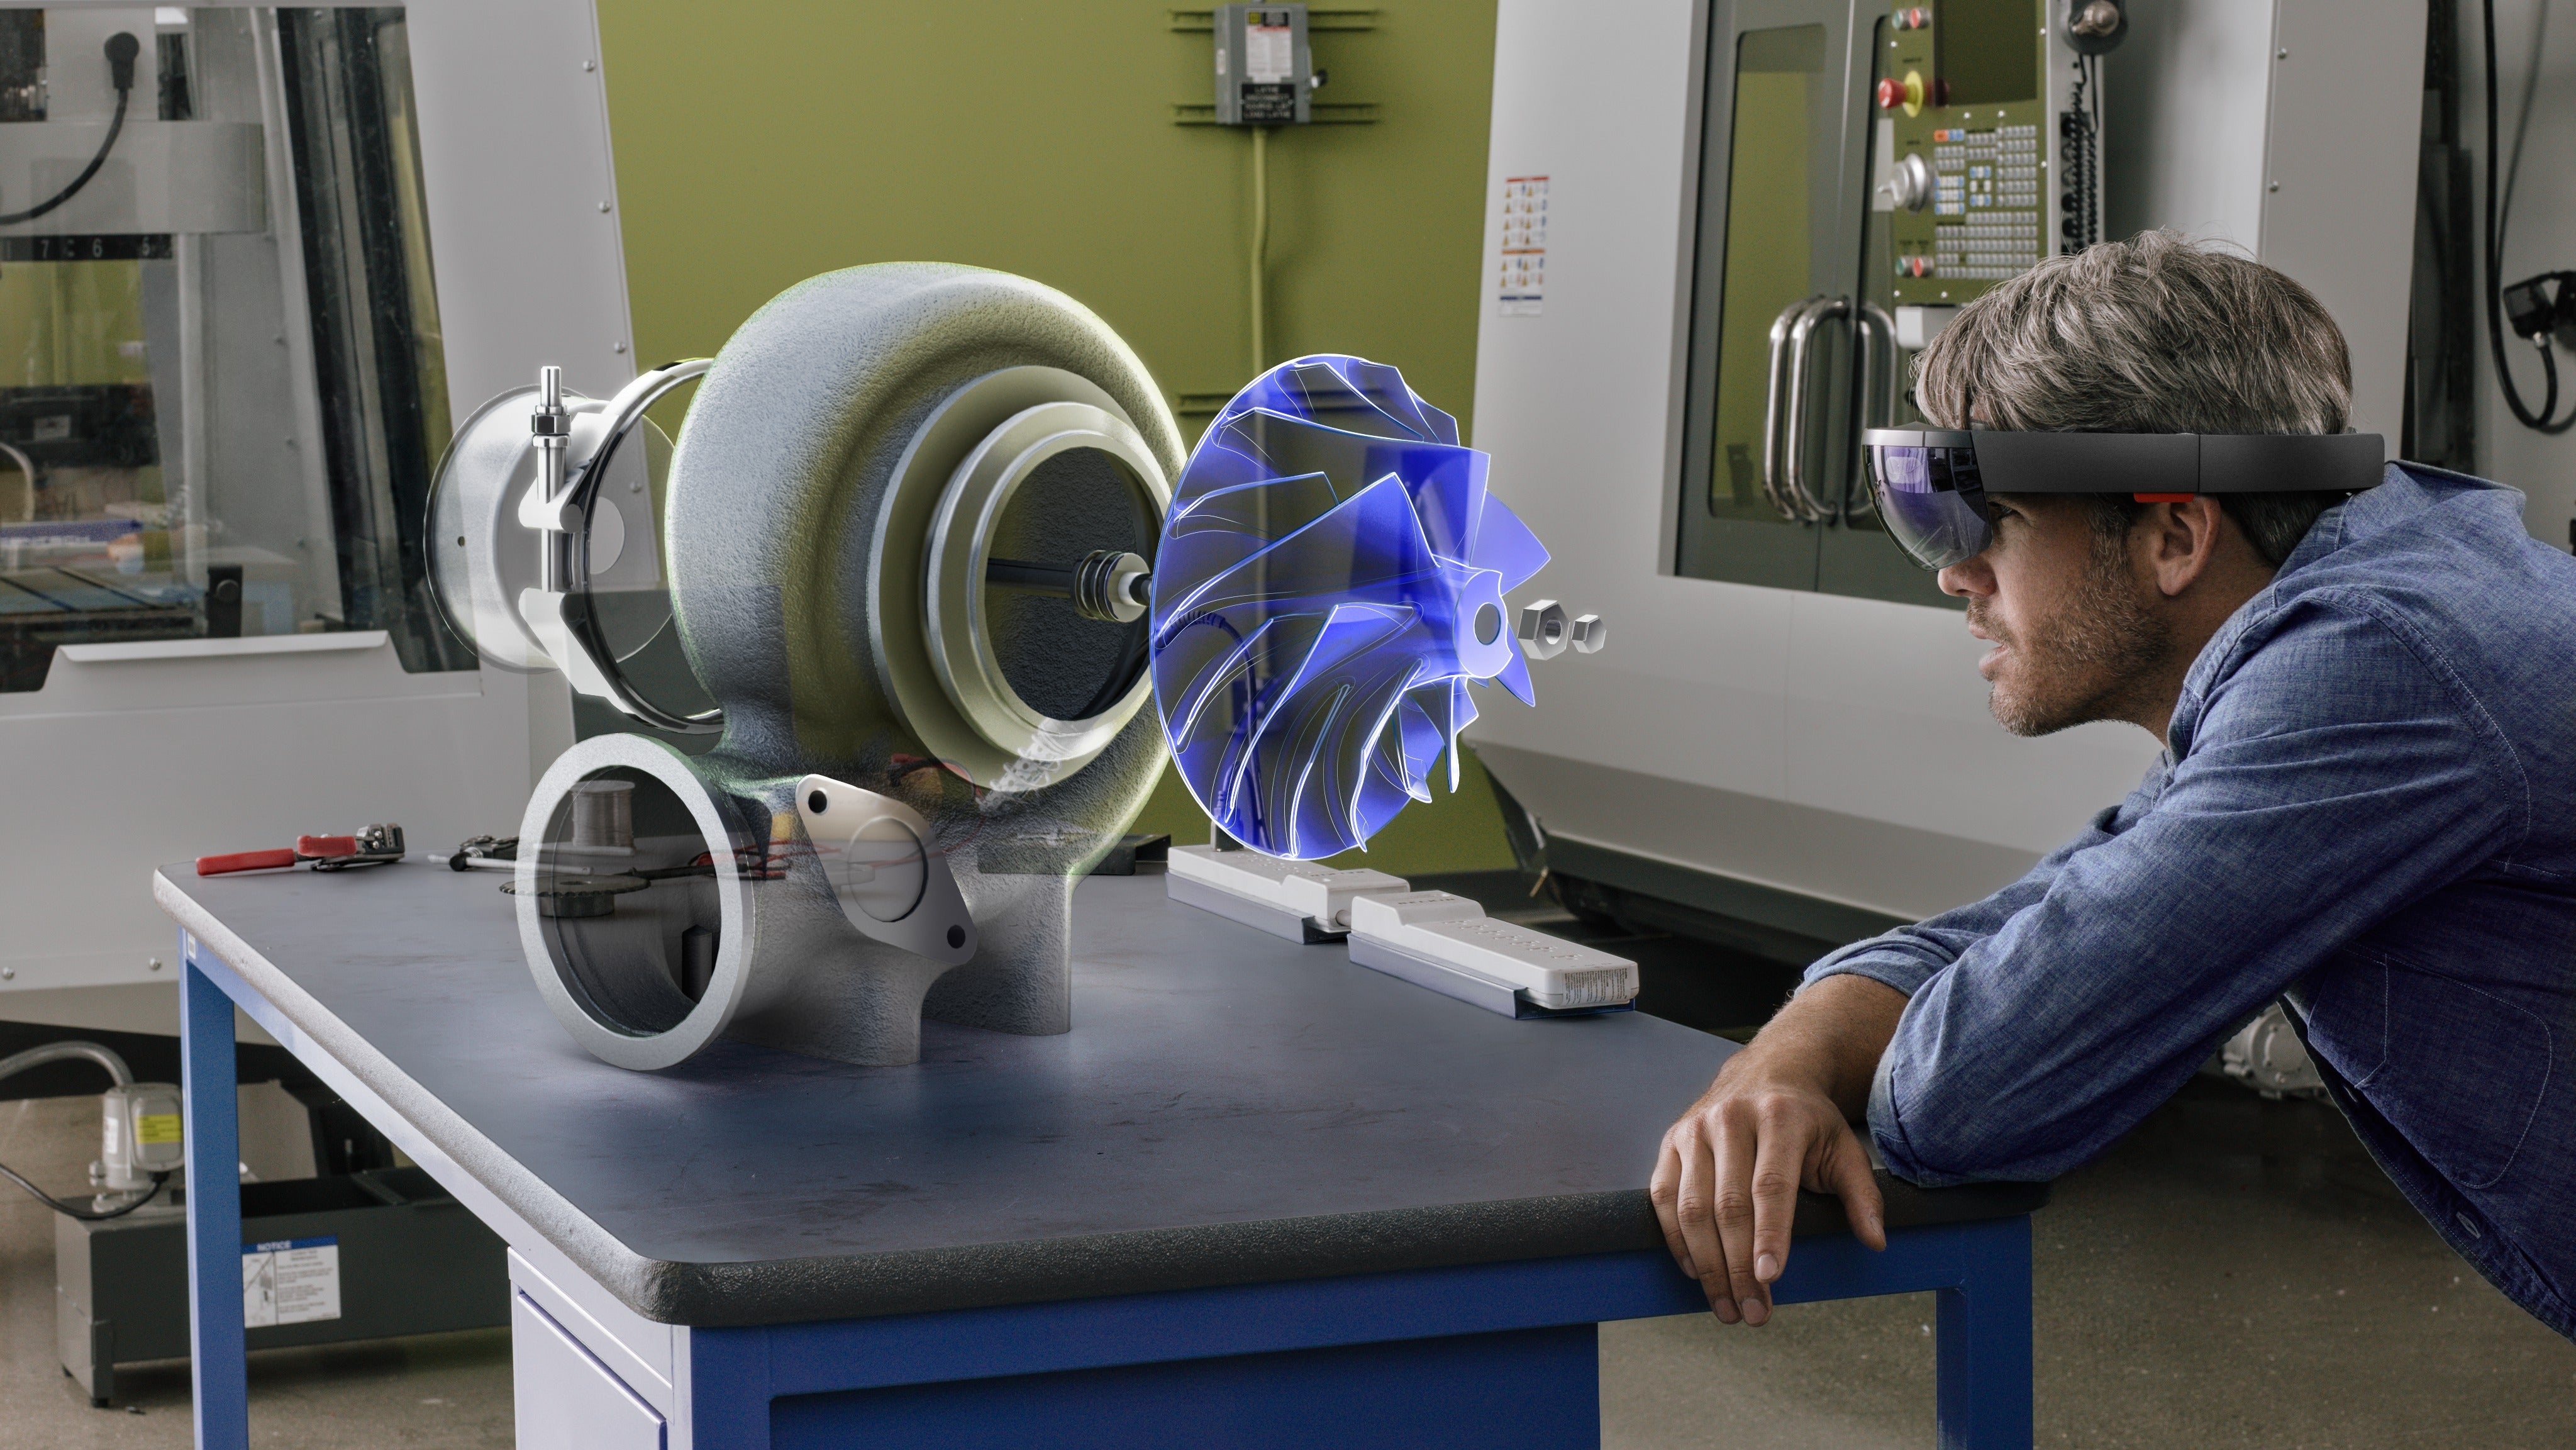 Microsoft’s Latest HoloLens Is Here, And It’s Amazing